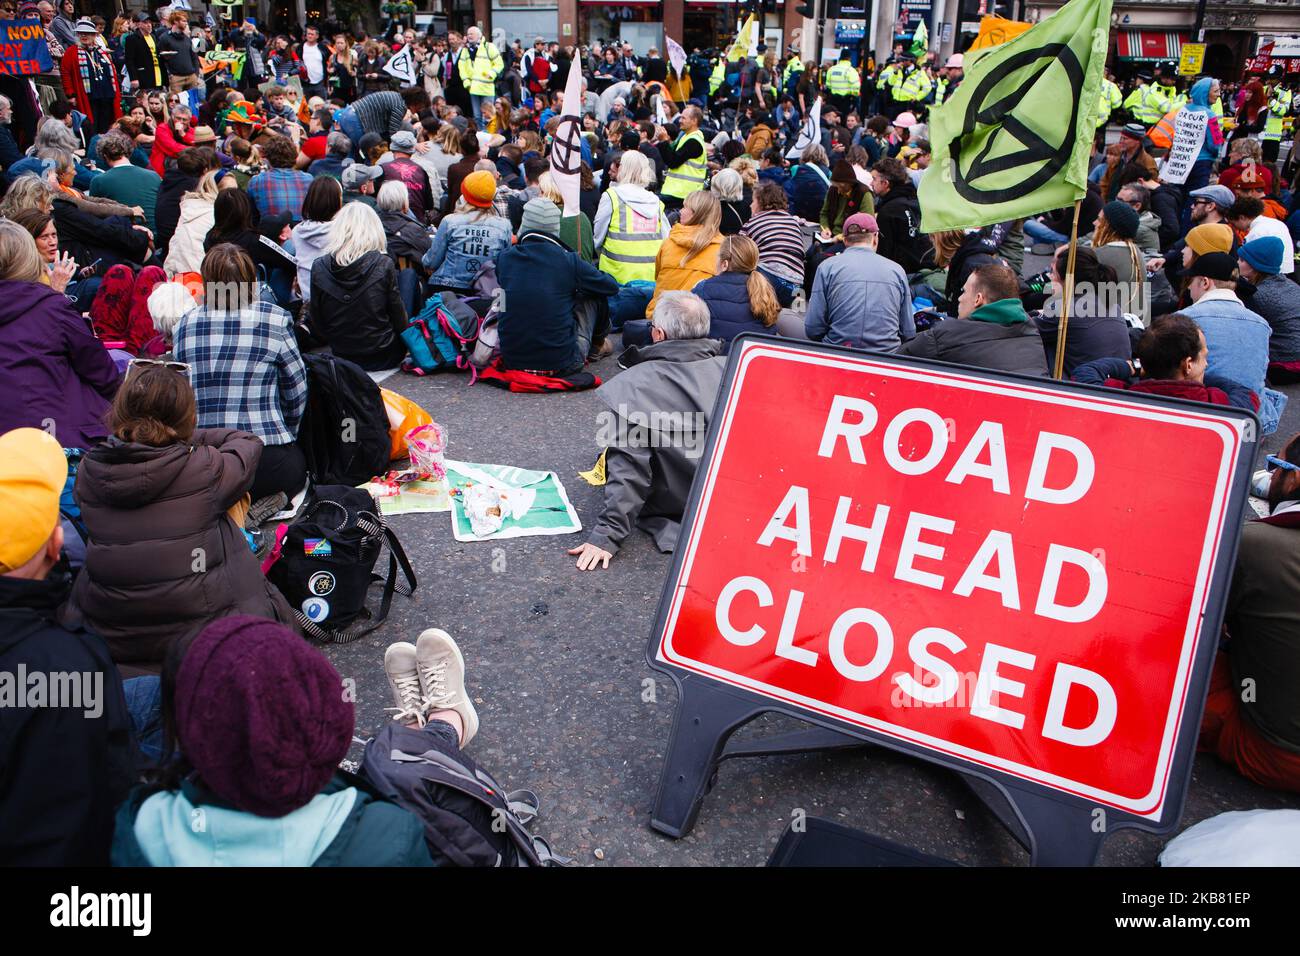 Members of climate change activist movement Extinction Rebellion (XR) sit in the road at Trafalgar Square on the fourth day of the group's two-week 'International Rebellion' in London, England, on October 10, 2019. By lunchtime Thursday police had all but contained the demonstrations in Trafalgar Square and the roadways around it, where sizeable numbers of XR followers remained. A hearse carrying a coffin for 'Our Future', which had been parked at the Whitehall exit from the square since Monday, was removed early afternoon. (Photo by David Cliff/NurPhoto) Stock Photo